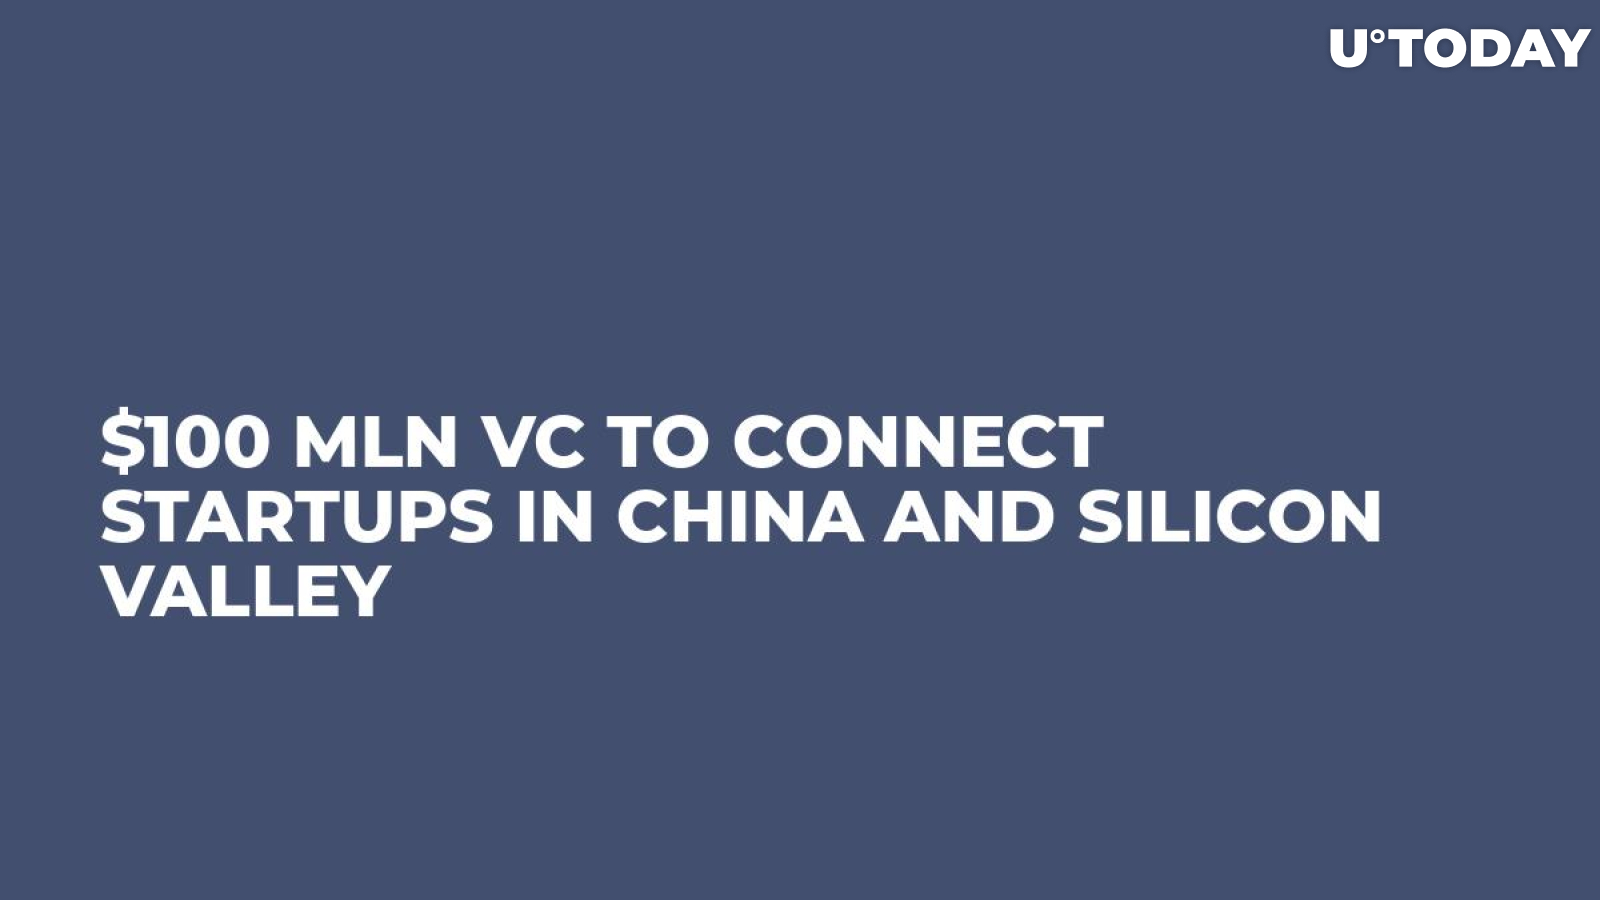 $100 Mln VC To Connect Startups in China And Silicon Valley